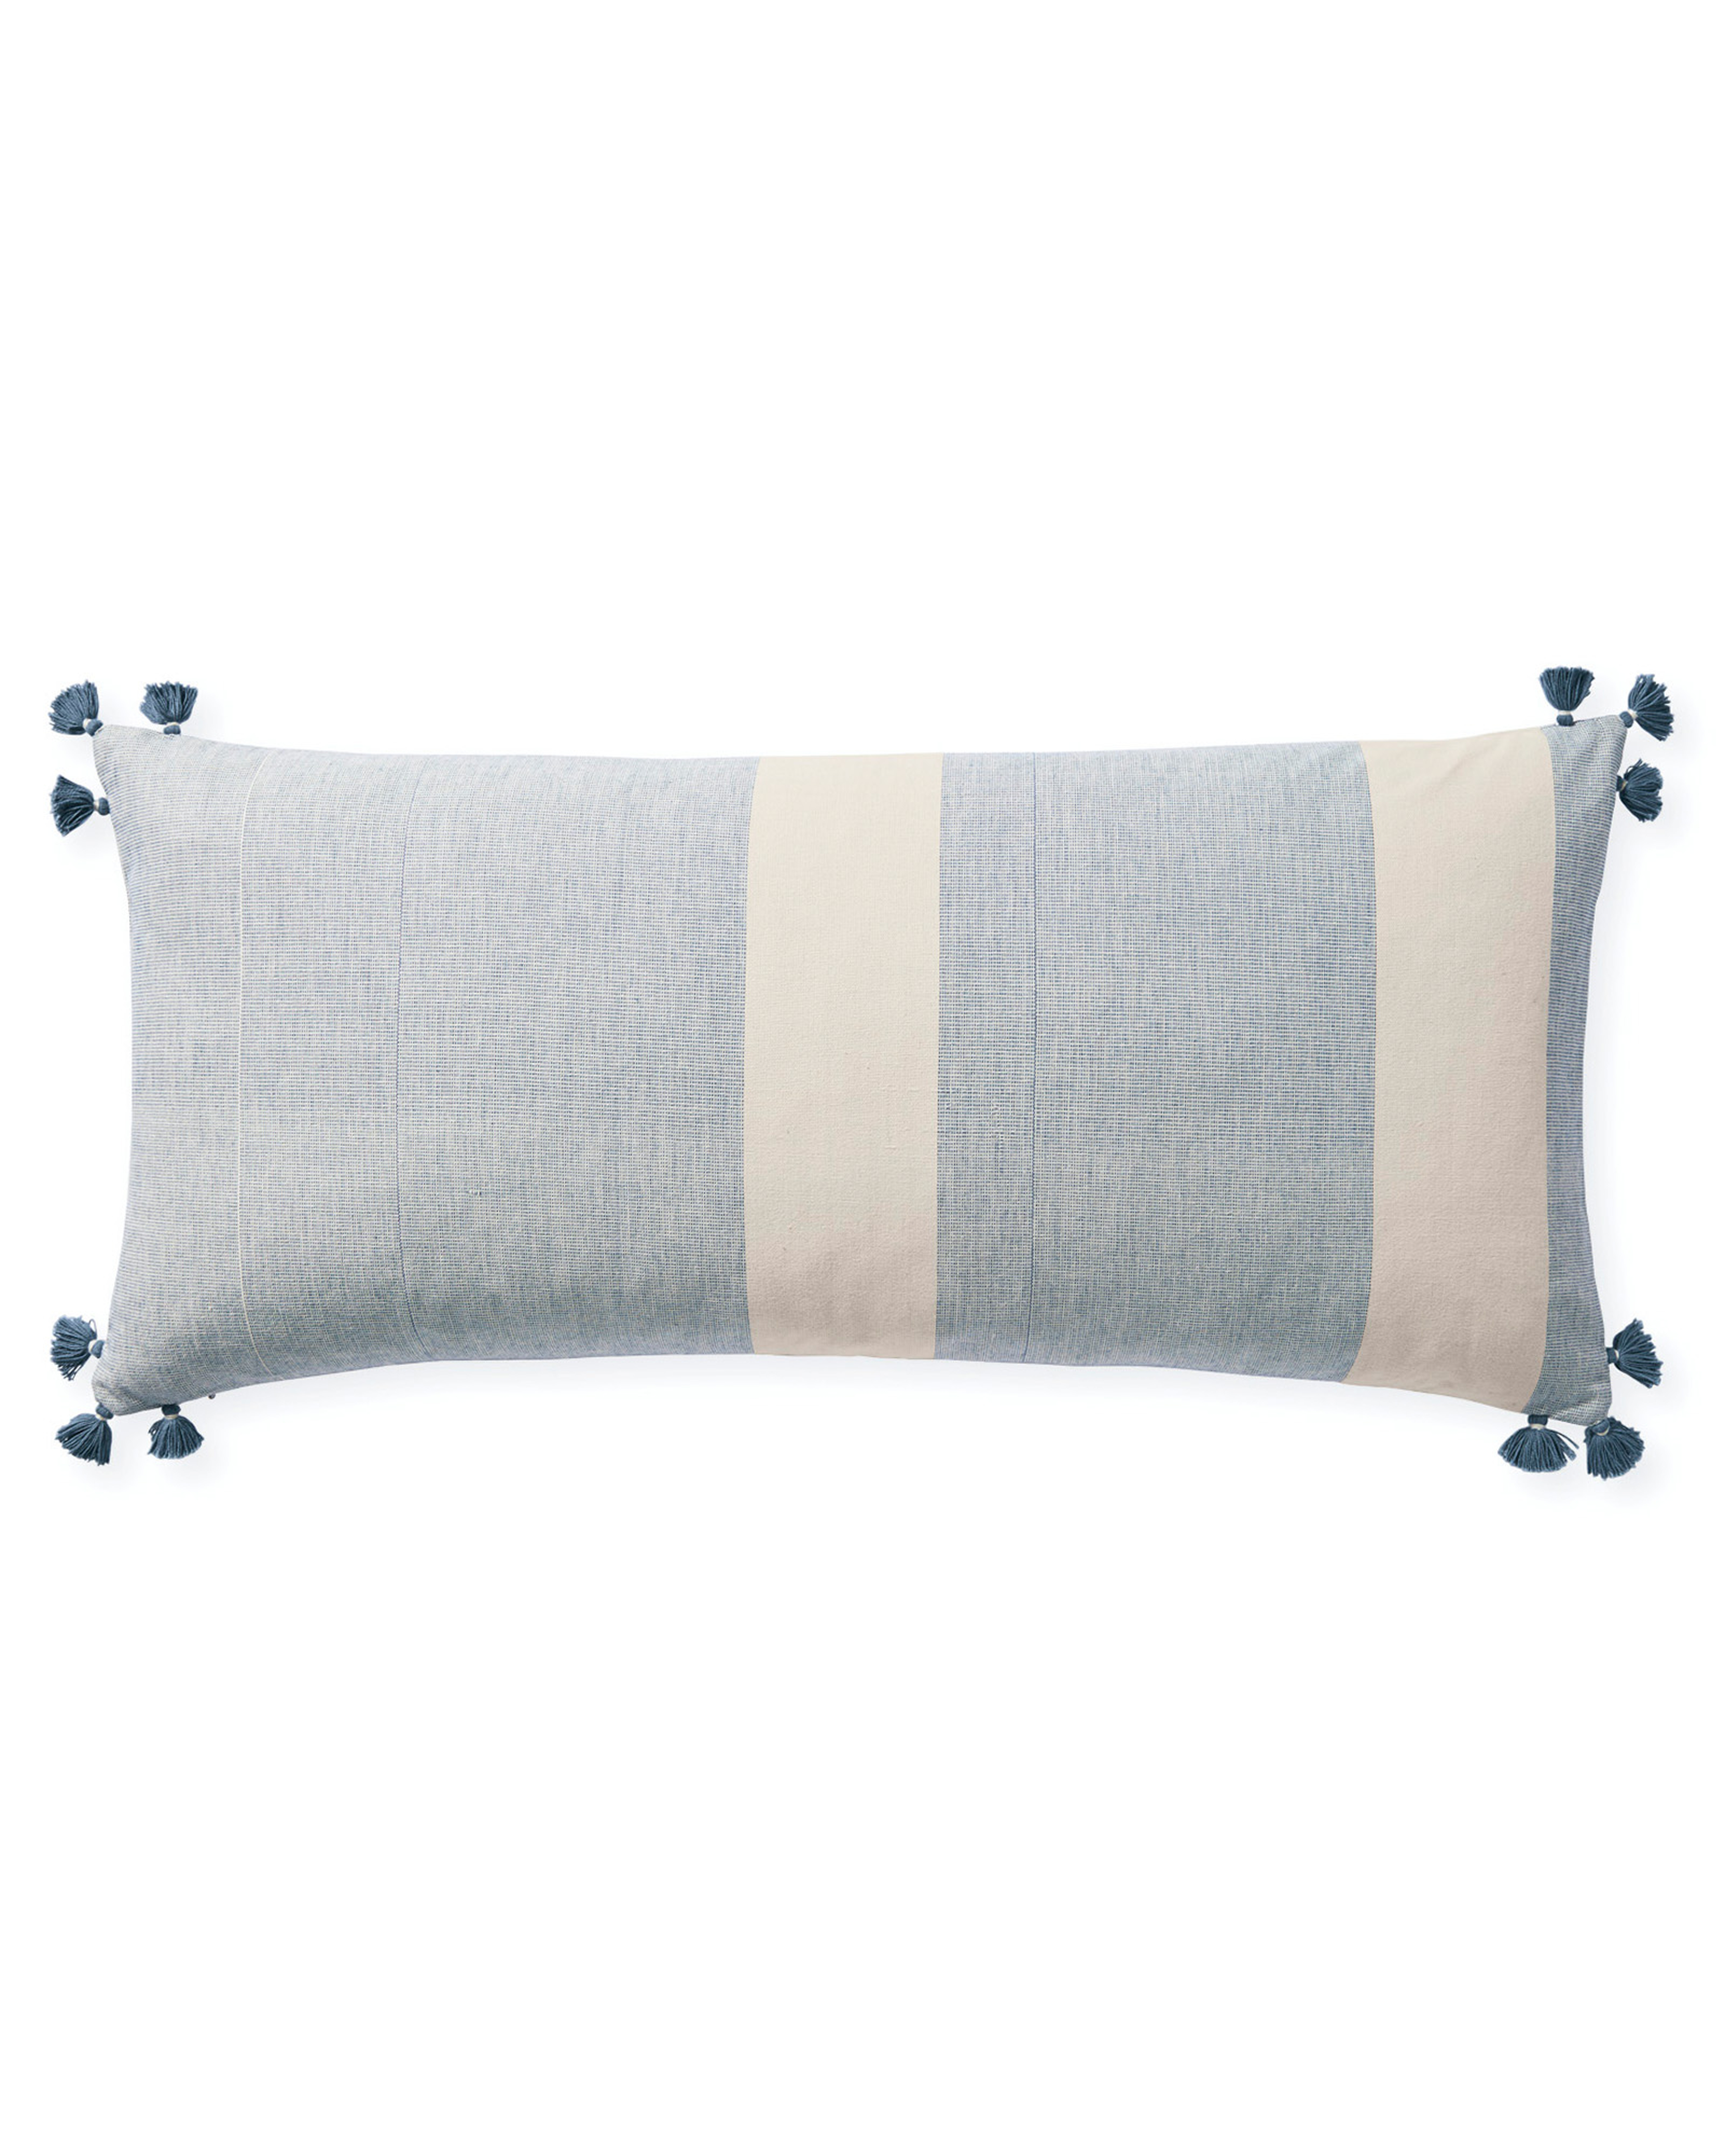 Bainbridge Pillow Cover - Serena and Lily